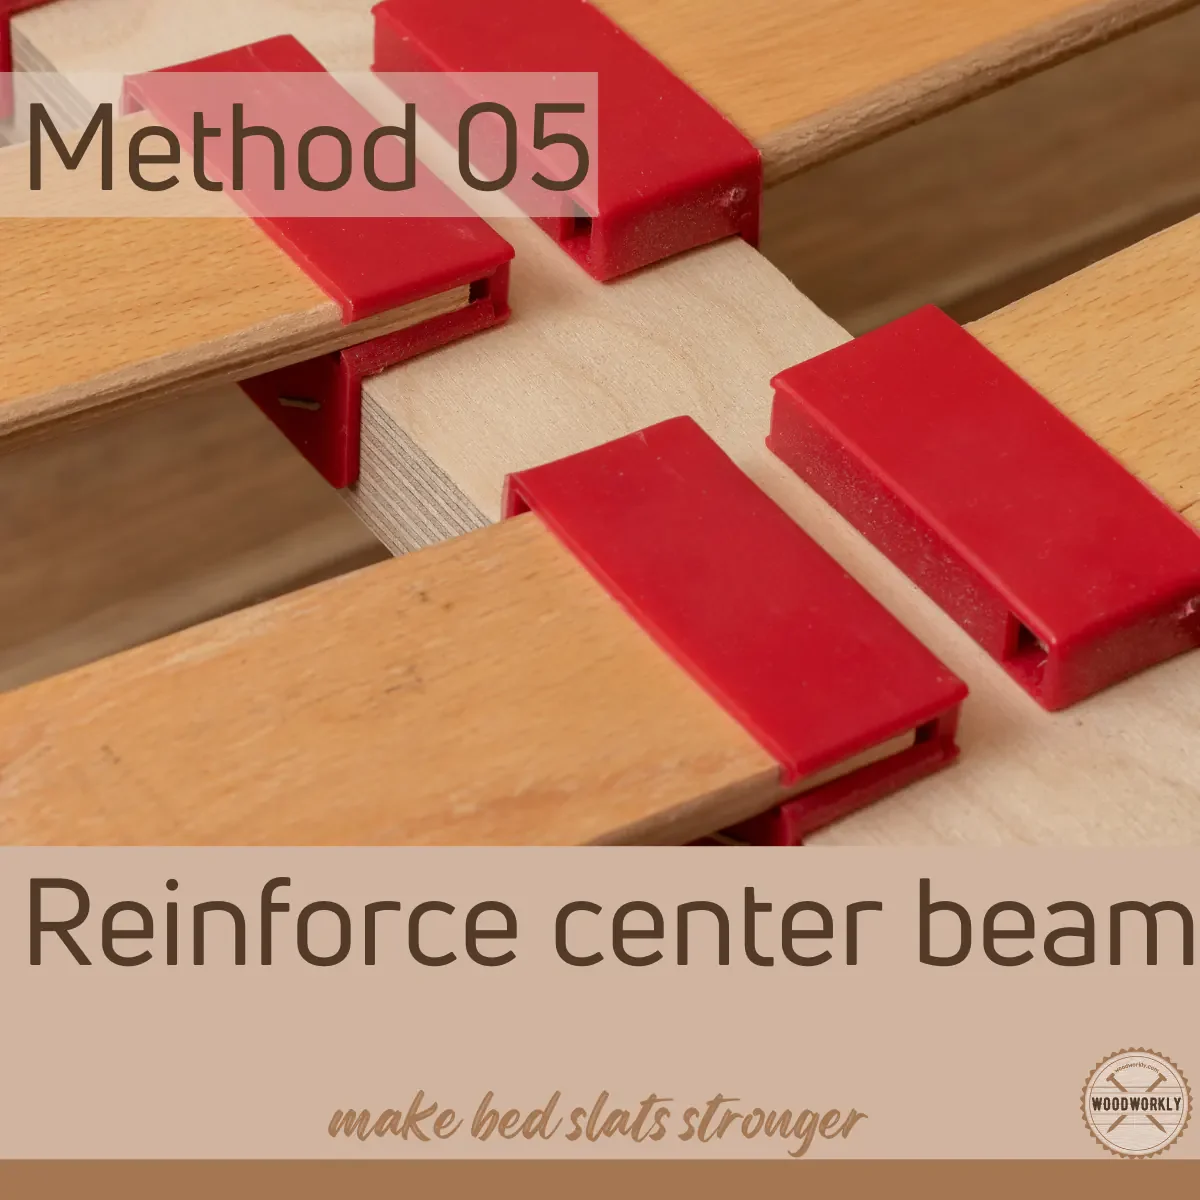 reinforce or replace the center beam to make slats stronger